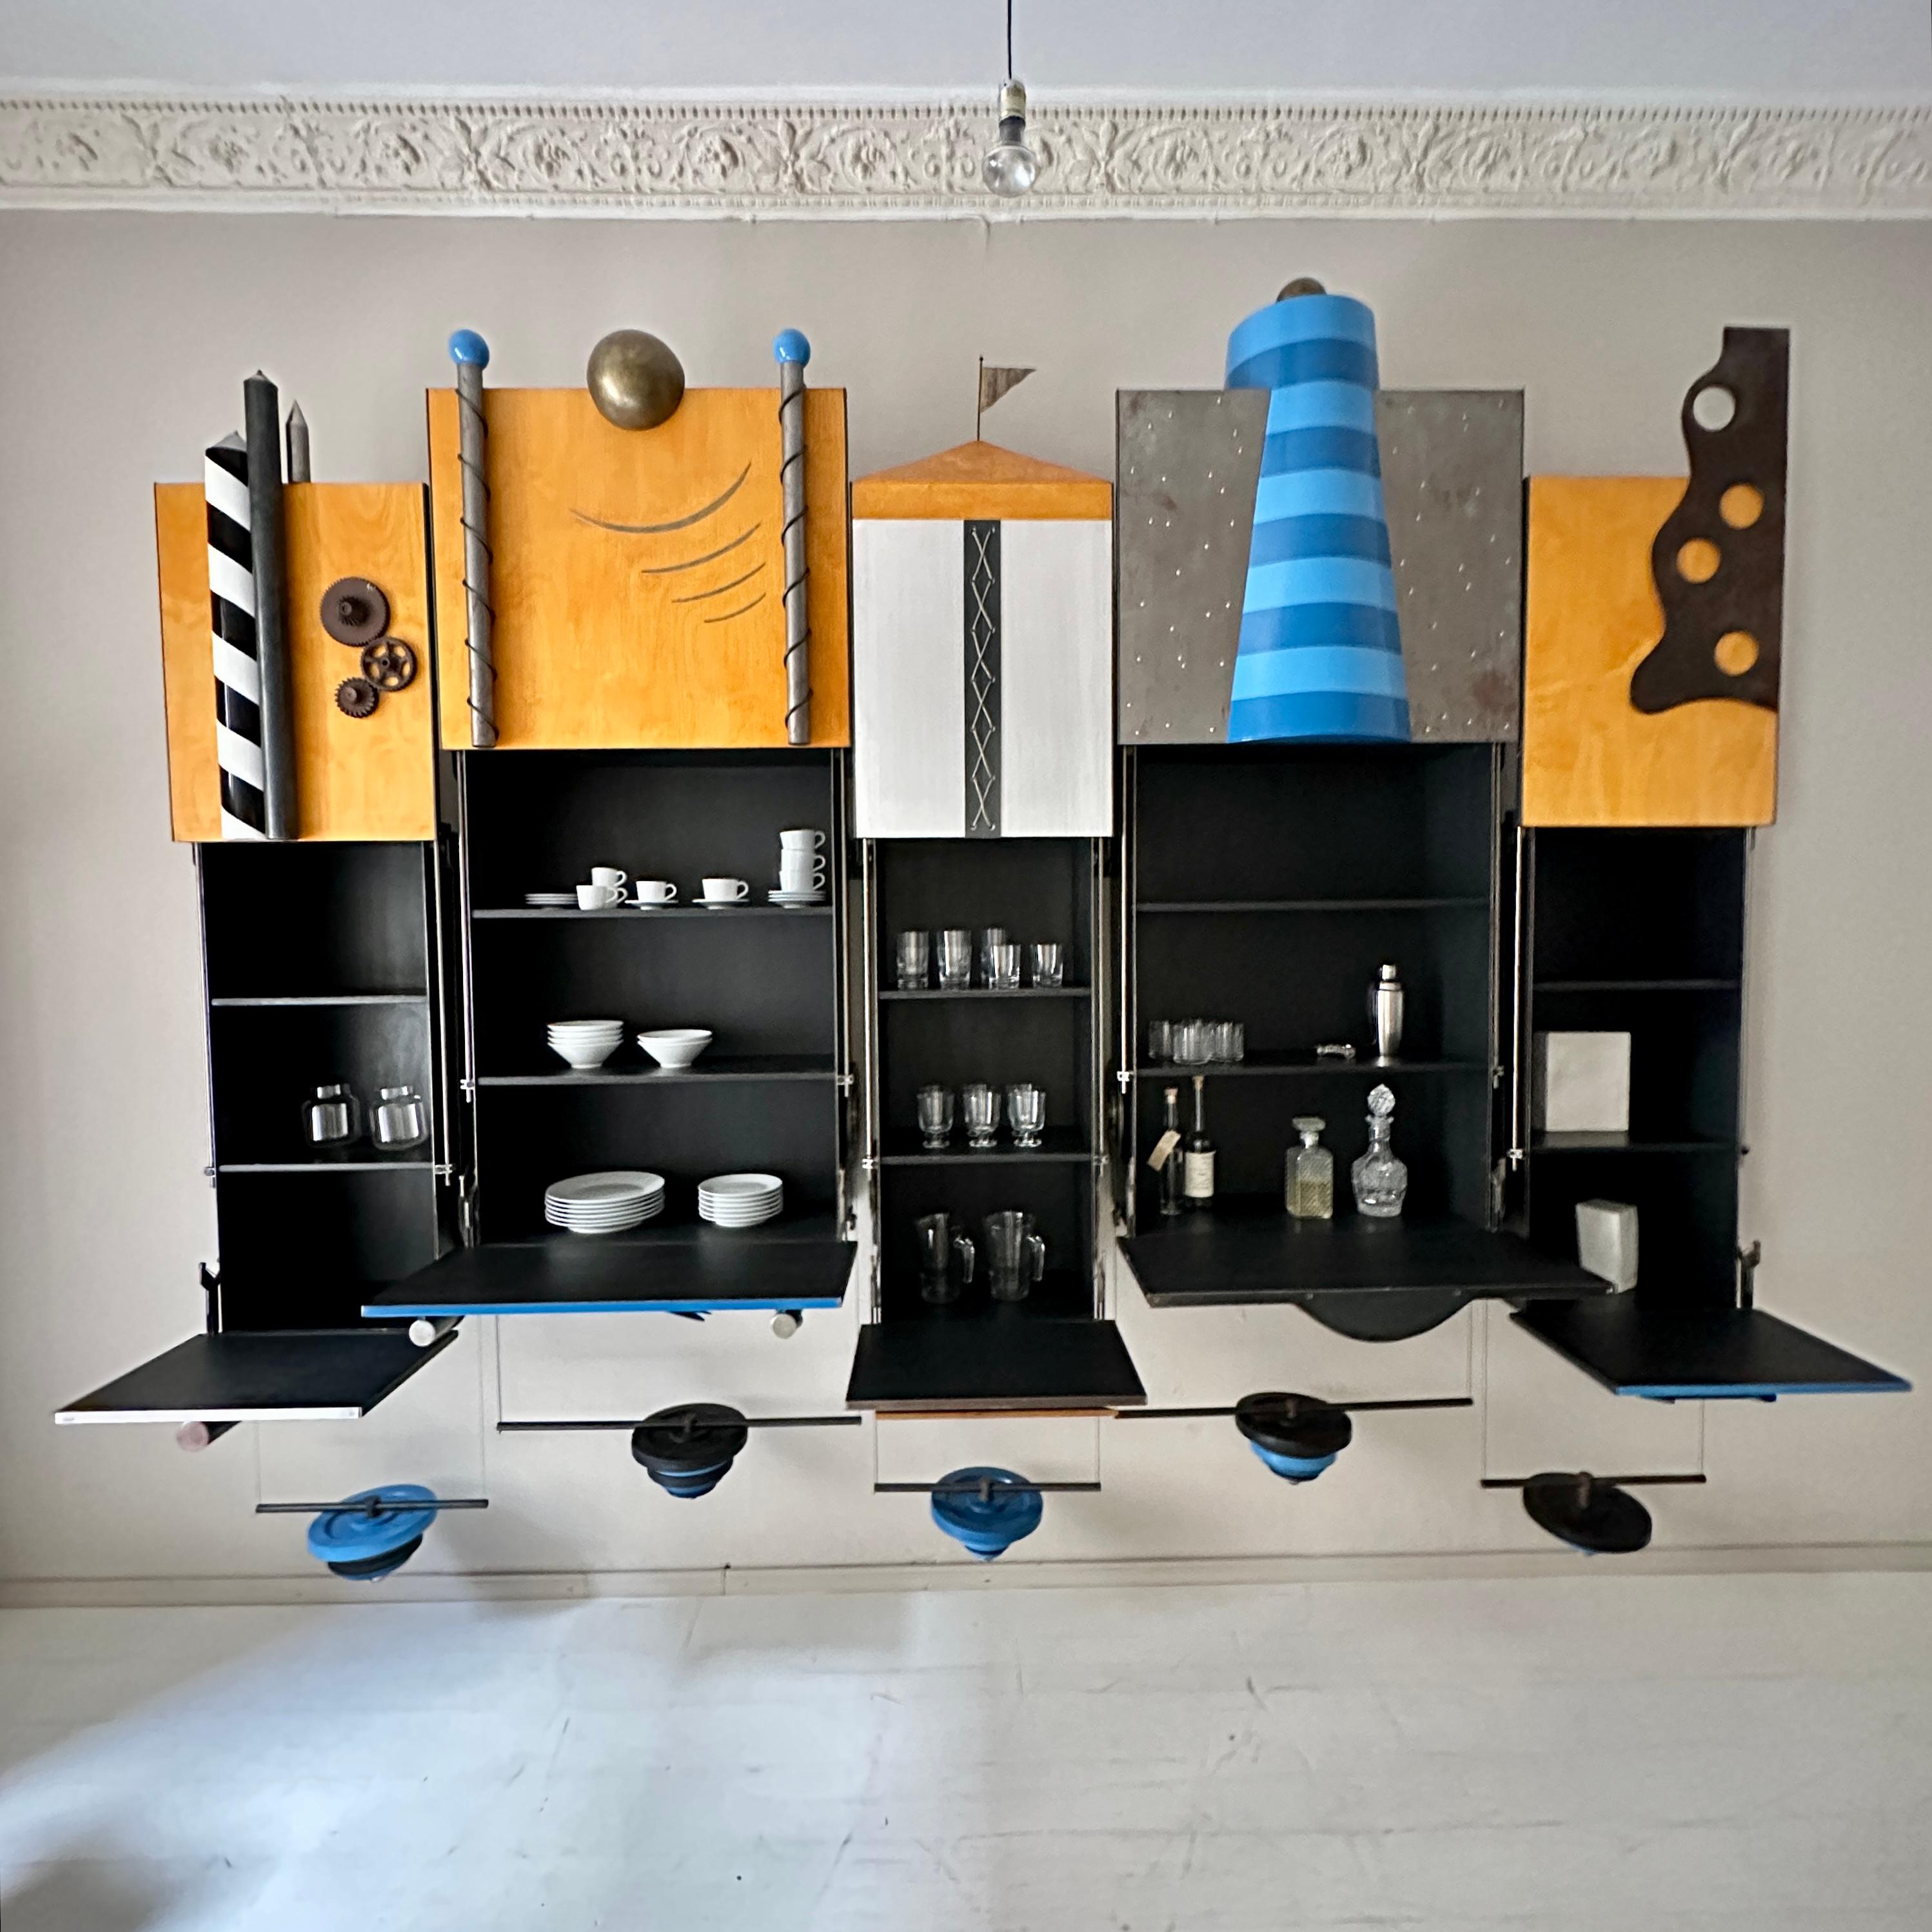 1980 Post-Modern Big Wall-Unit in Metall, lacquered Plywood in Blue, White Black In Good Condition For Sale In Berlin, DE